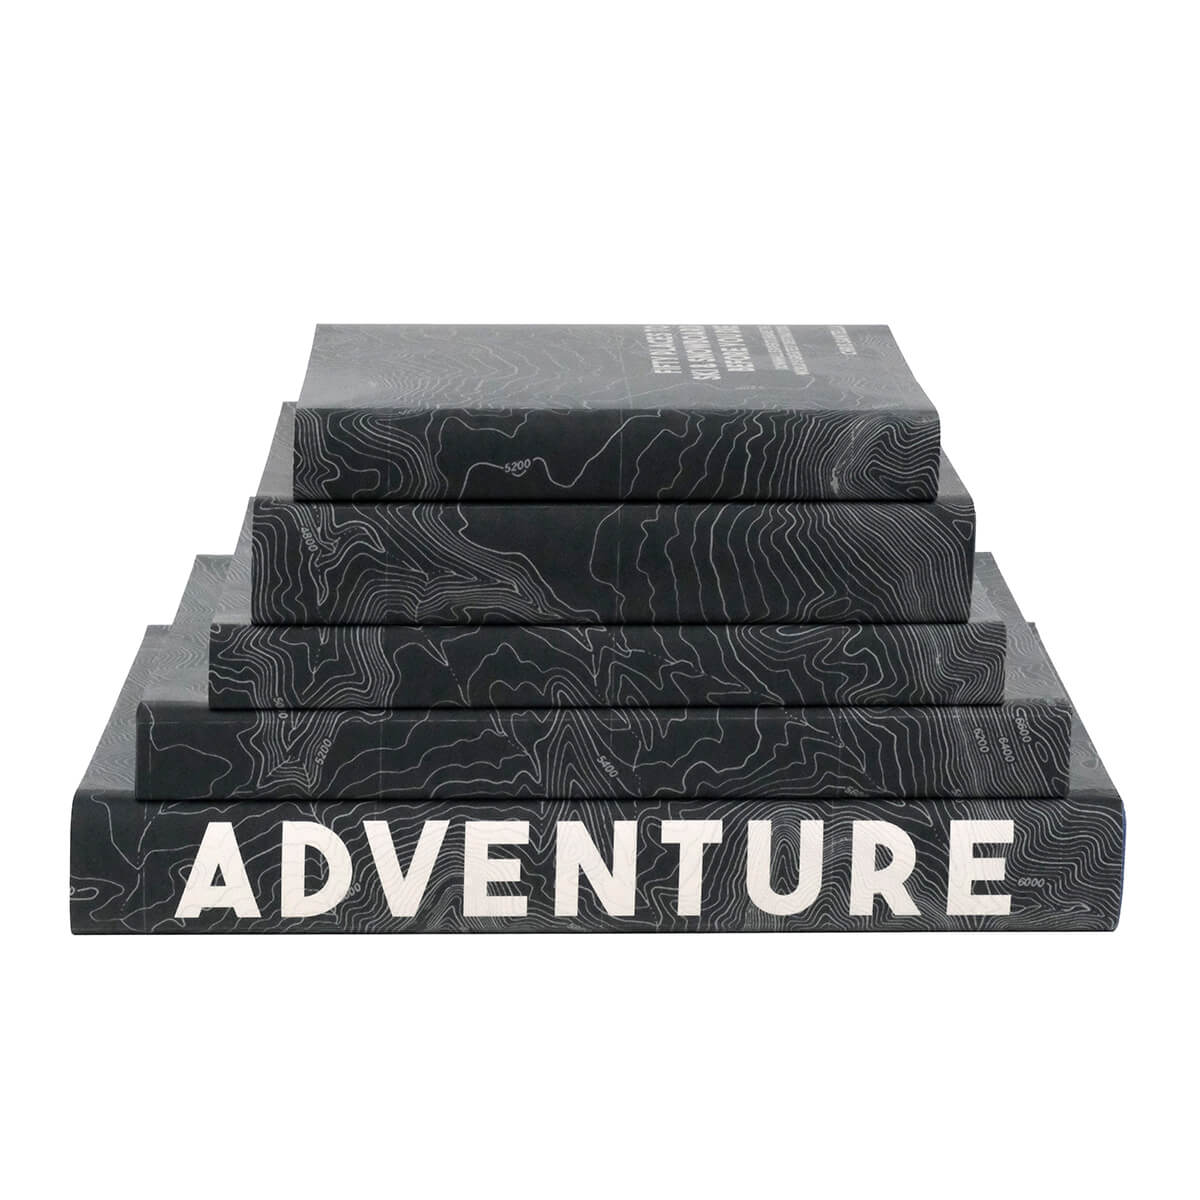 The Adventure set is a comprehensive visual history on surfing, cycling, mountaineering, incredible skiing and snowboarding destinations, and other life-changing adventures. Each volume features hundreds of photographs, illustrations, and essays capturing the spirit and energy of different adventures, traditions, and cultures. Makes a great gift!